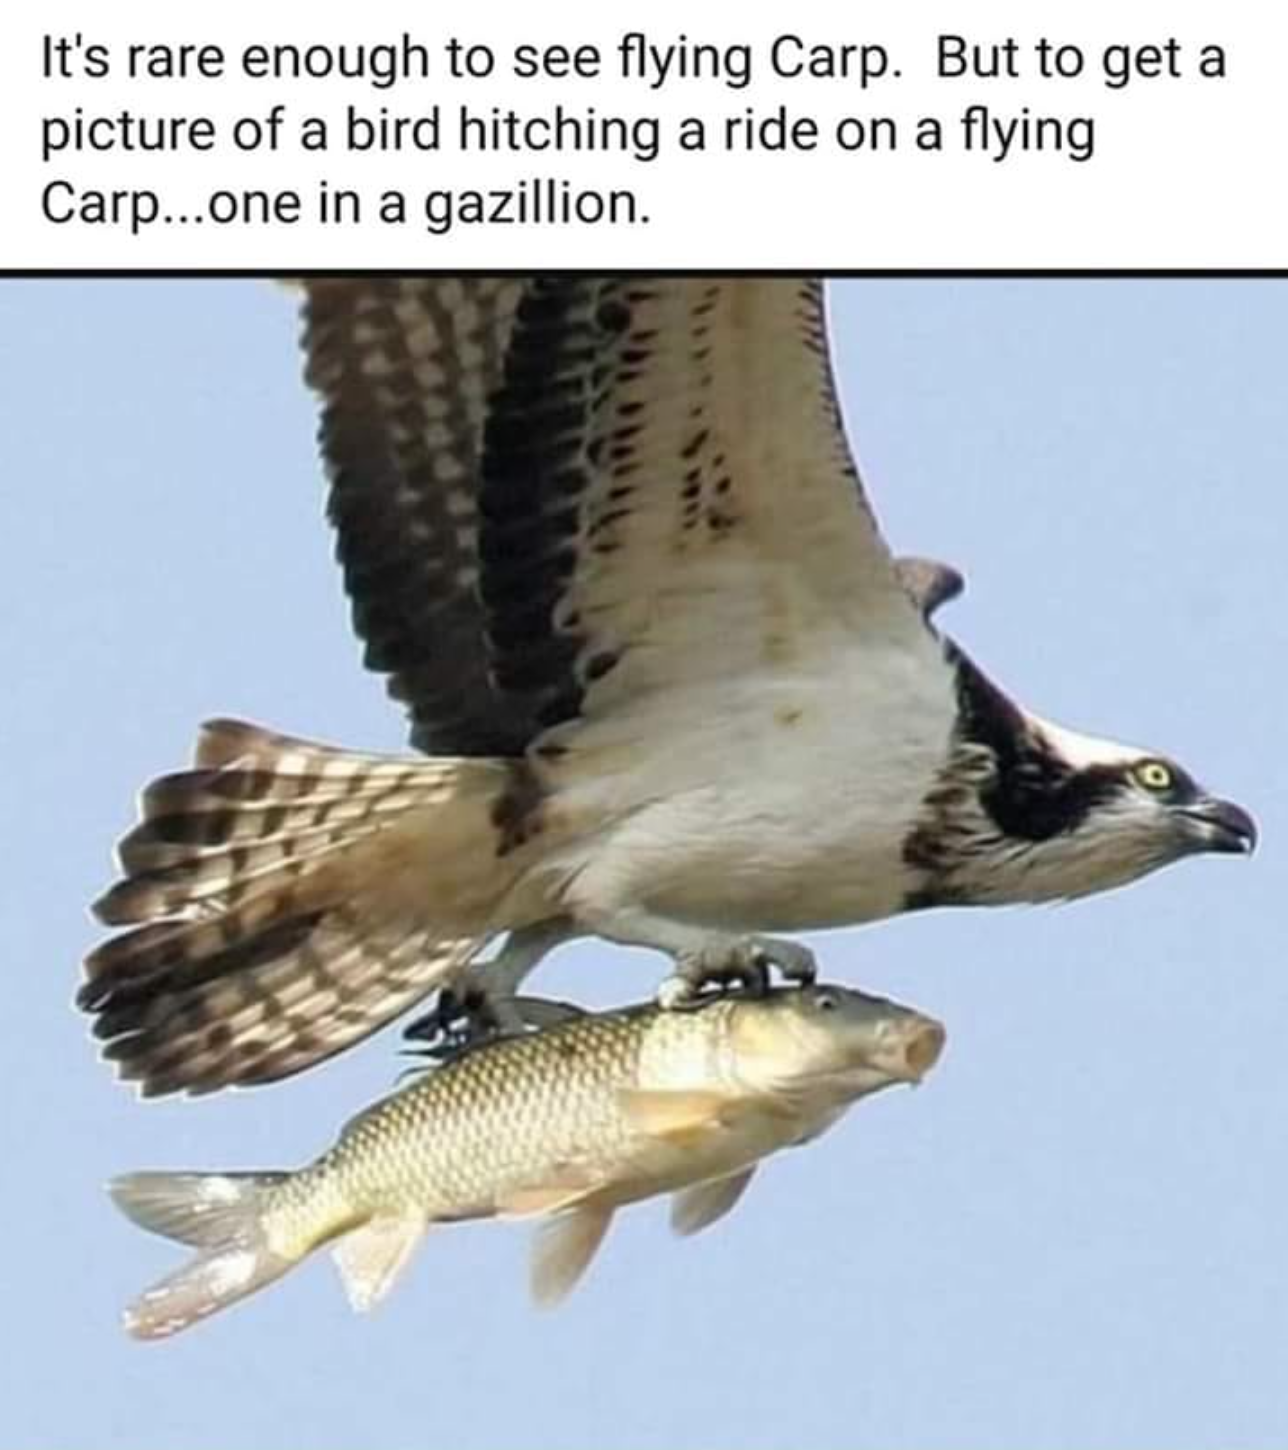 carp meme - It's rare enough to see flying Carp. But to get a picture of a bird hitching a ride on a flying Carp...one in a gazillion.